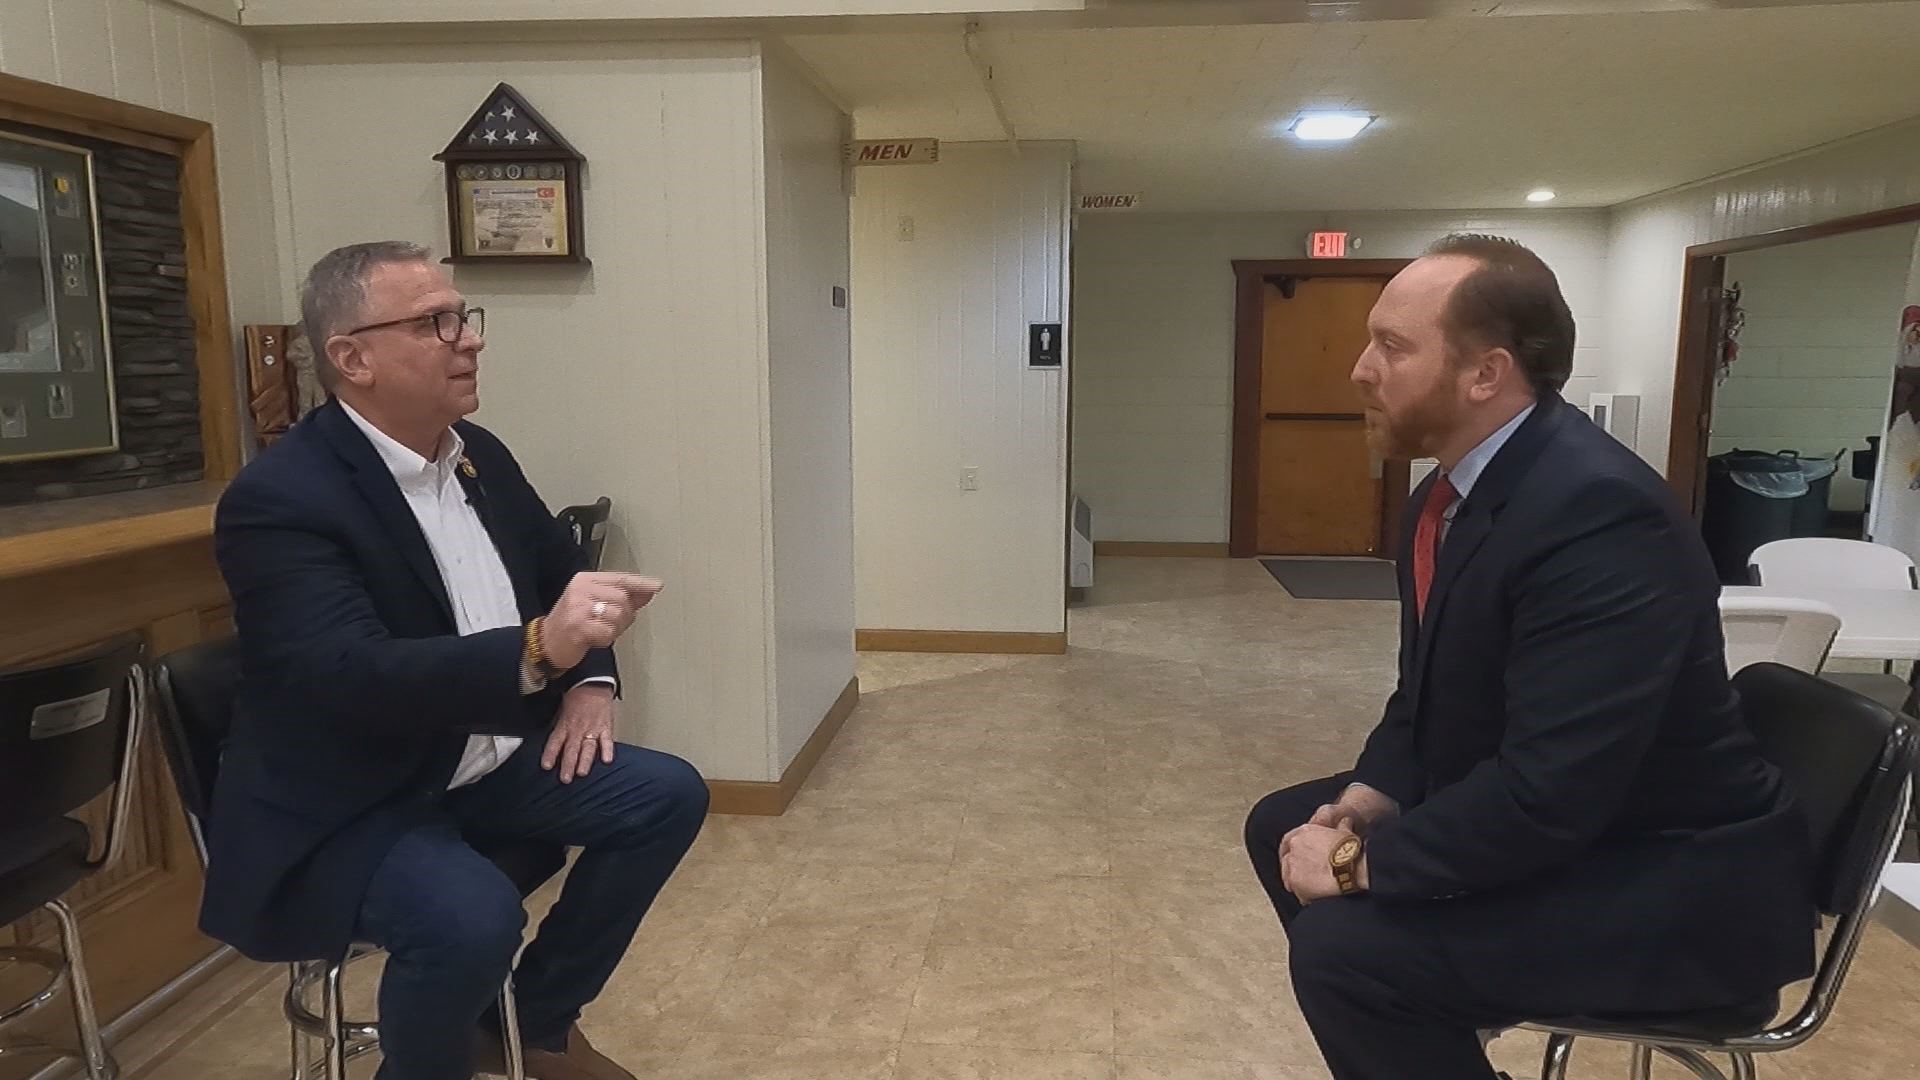 In our one-on-one exclusive with Congressman Mike Bost on the campaign trail, Bost talks about his qualifications and the Republican fight for control in the House.